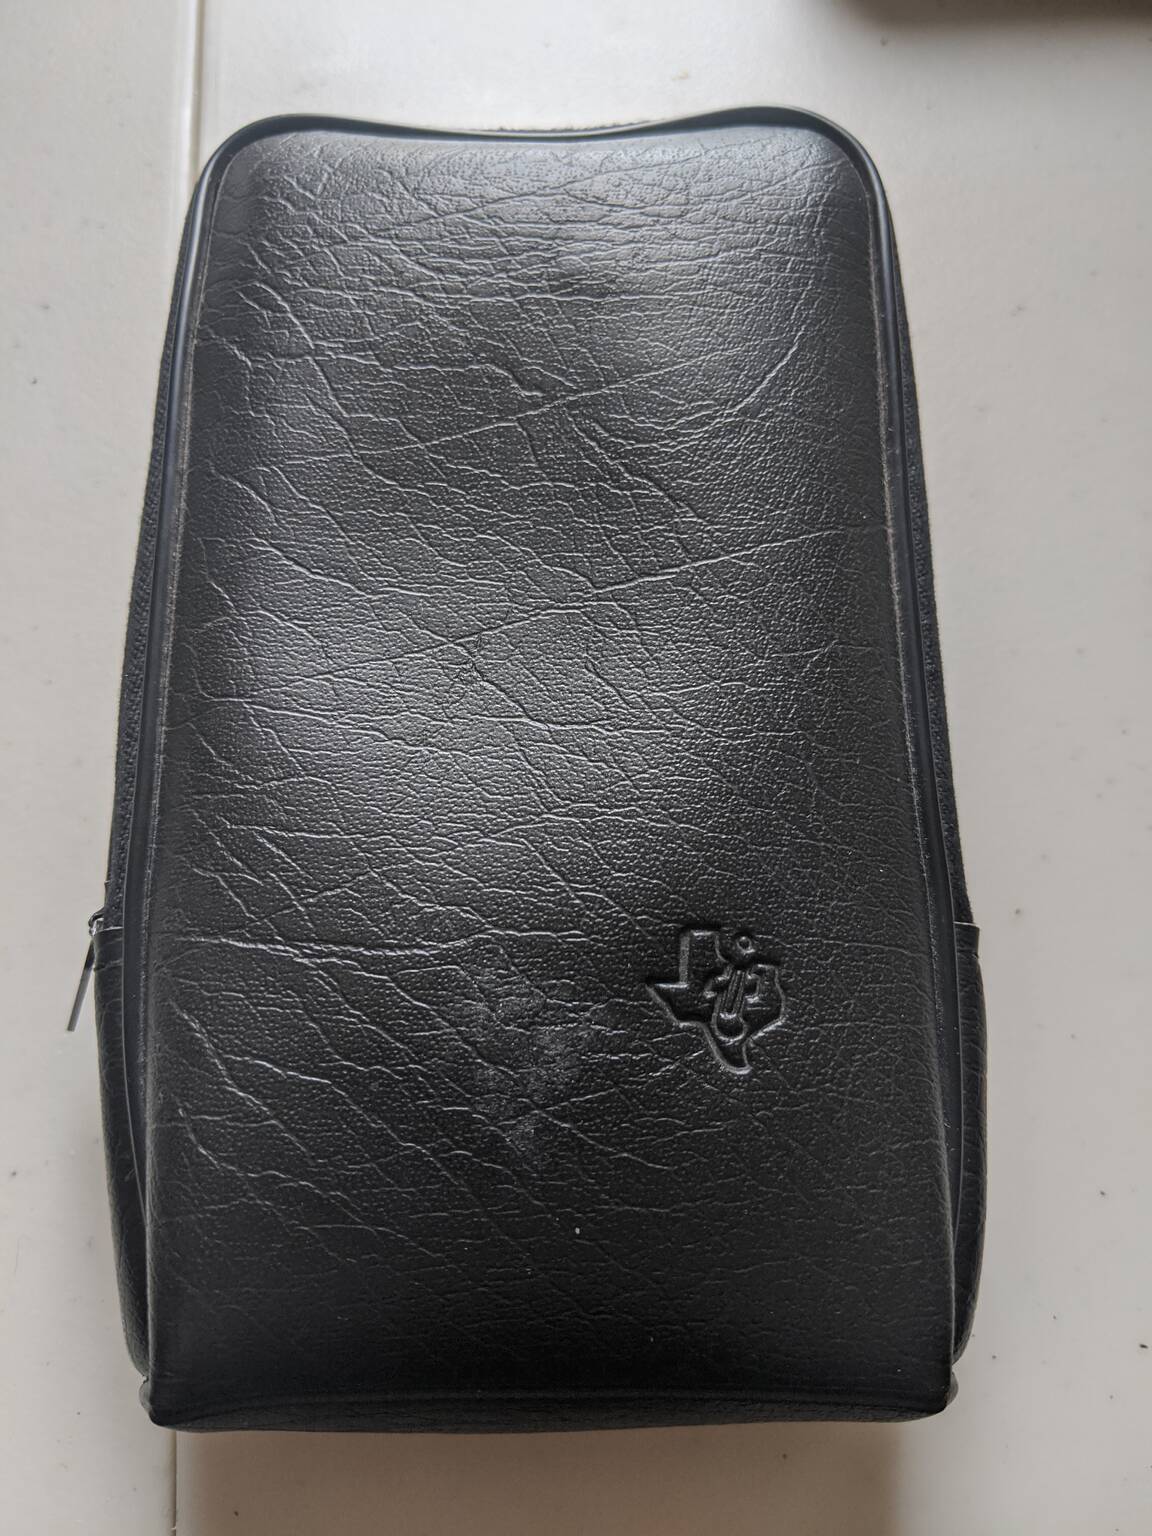 TI-59 Carrying 
Case